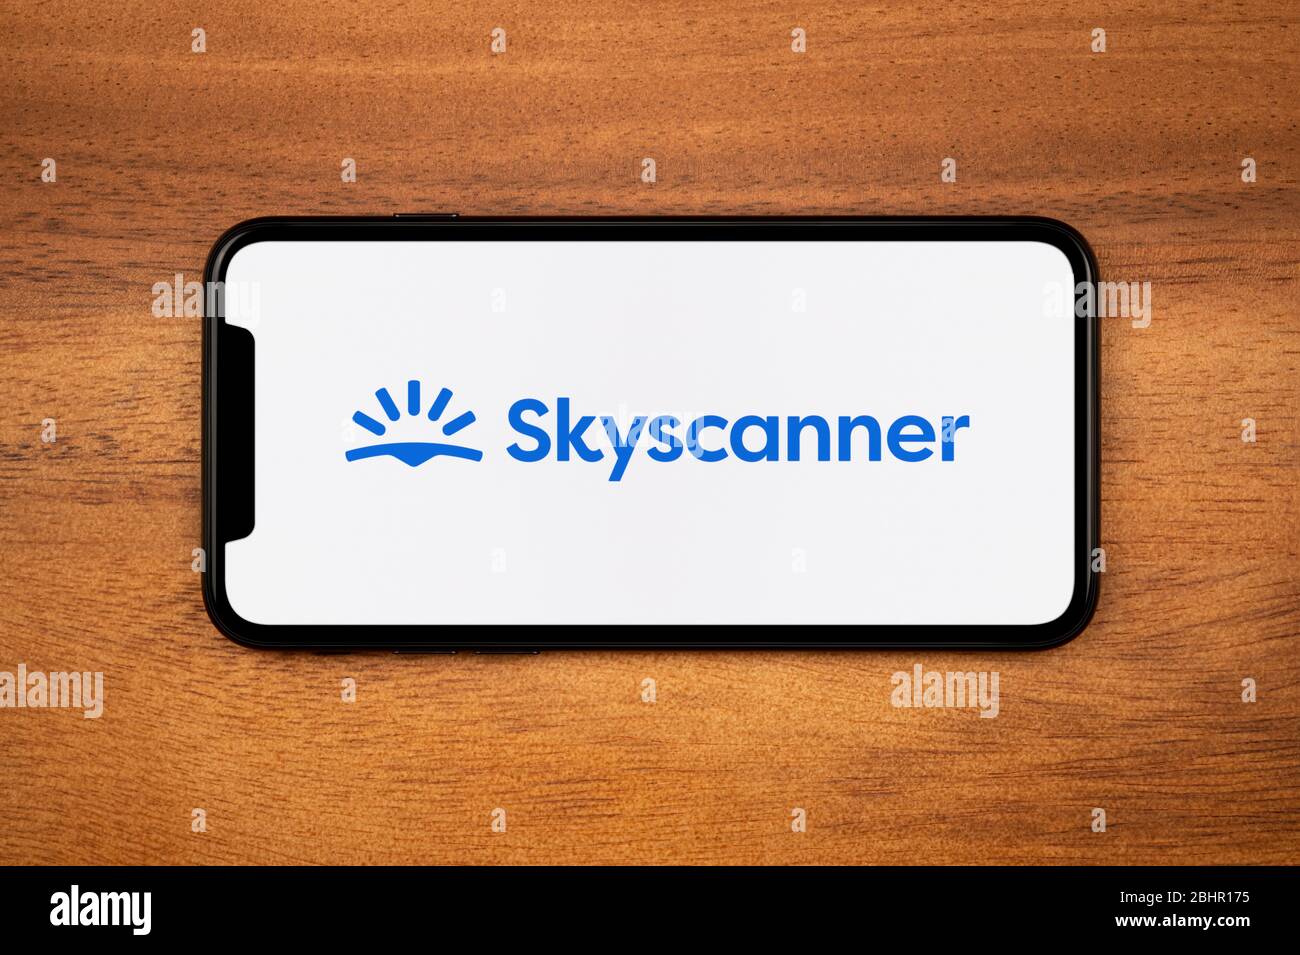 A Smartphone Showing The Skyscanner Logo Rests On A Plain Wooden Table Editorial Use Only Stock Photo Alamy